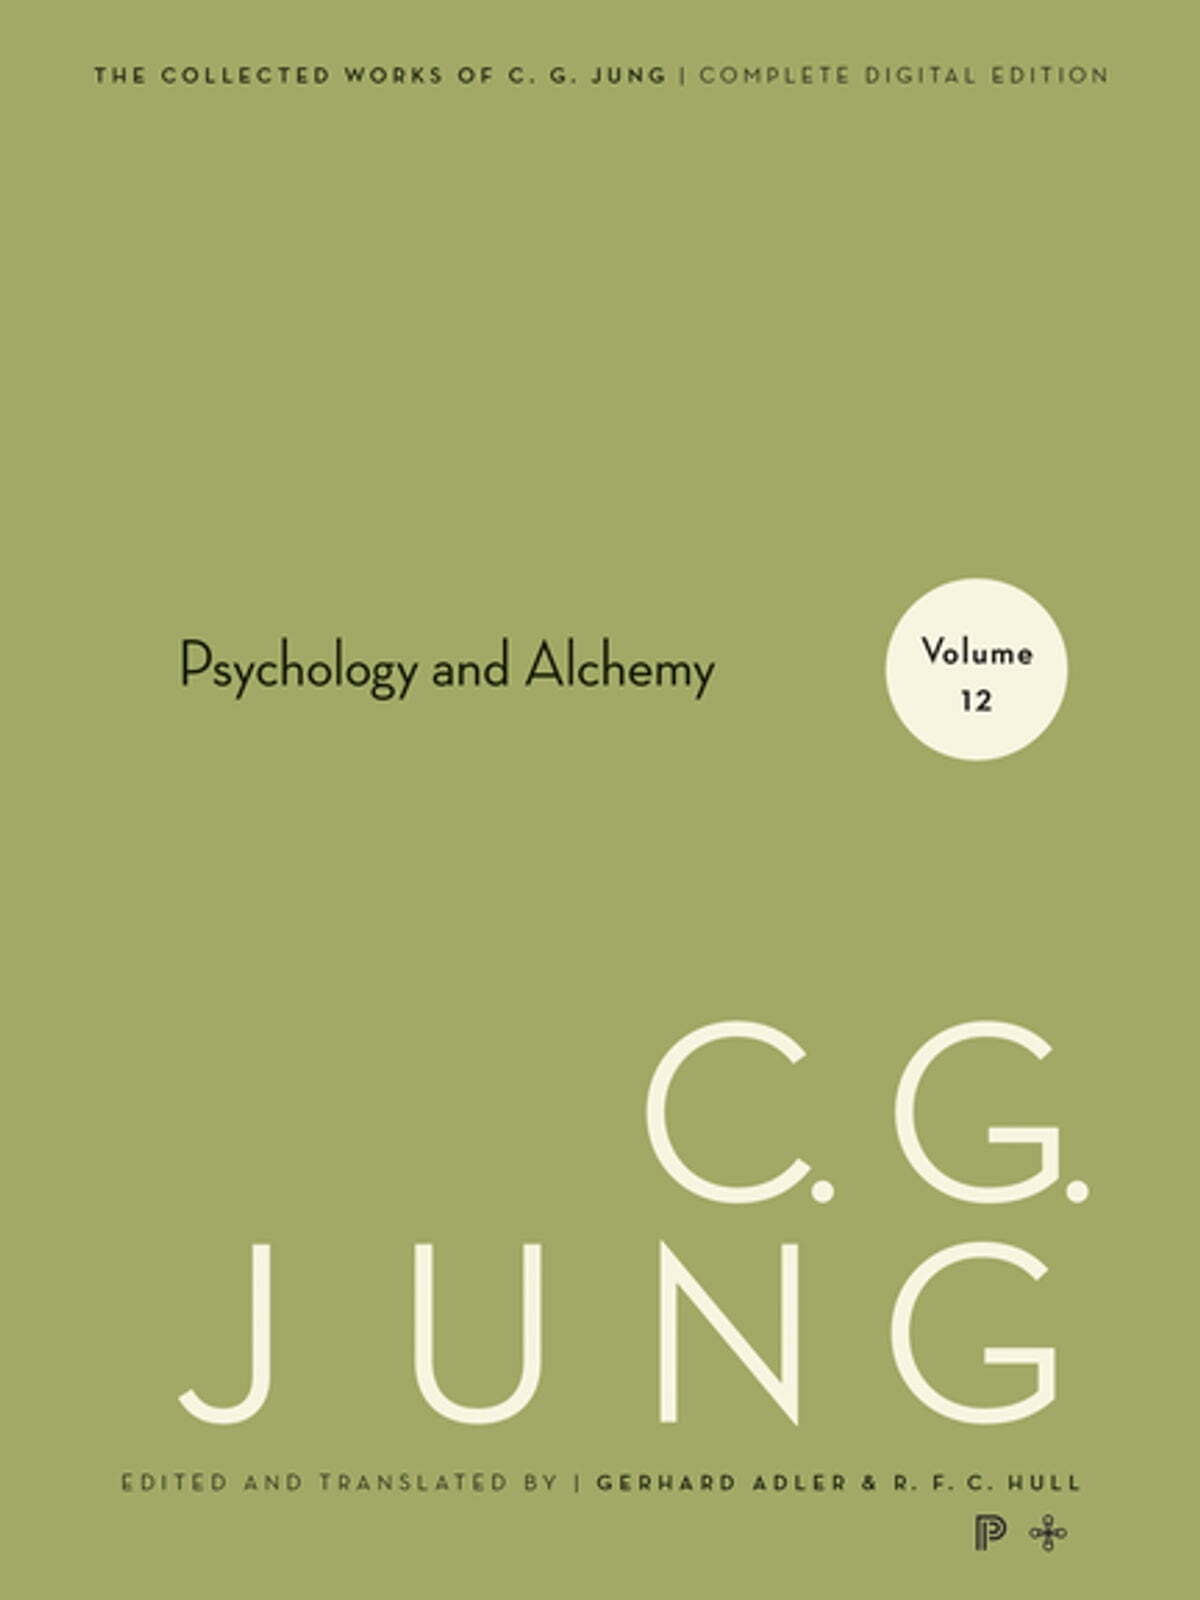 Collected Works of C. G. Jung - Volume 12: Psychology and Alchemy